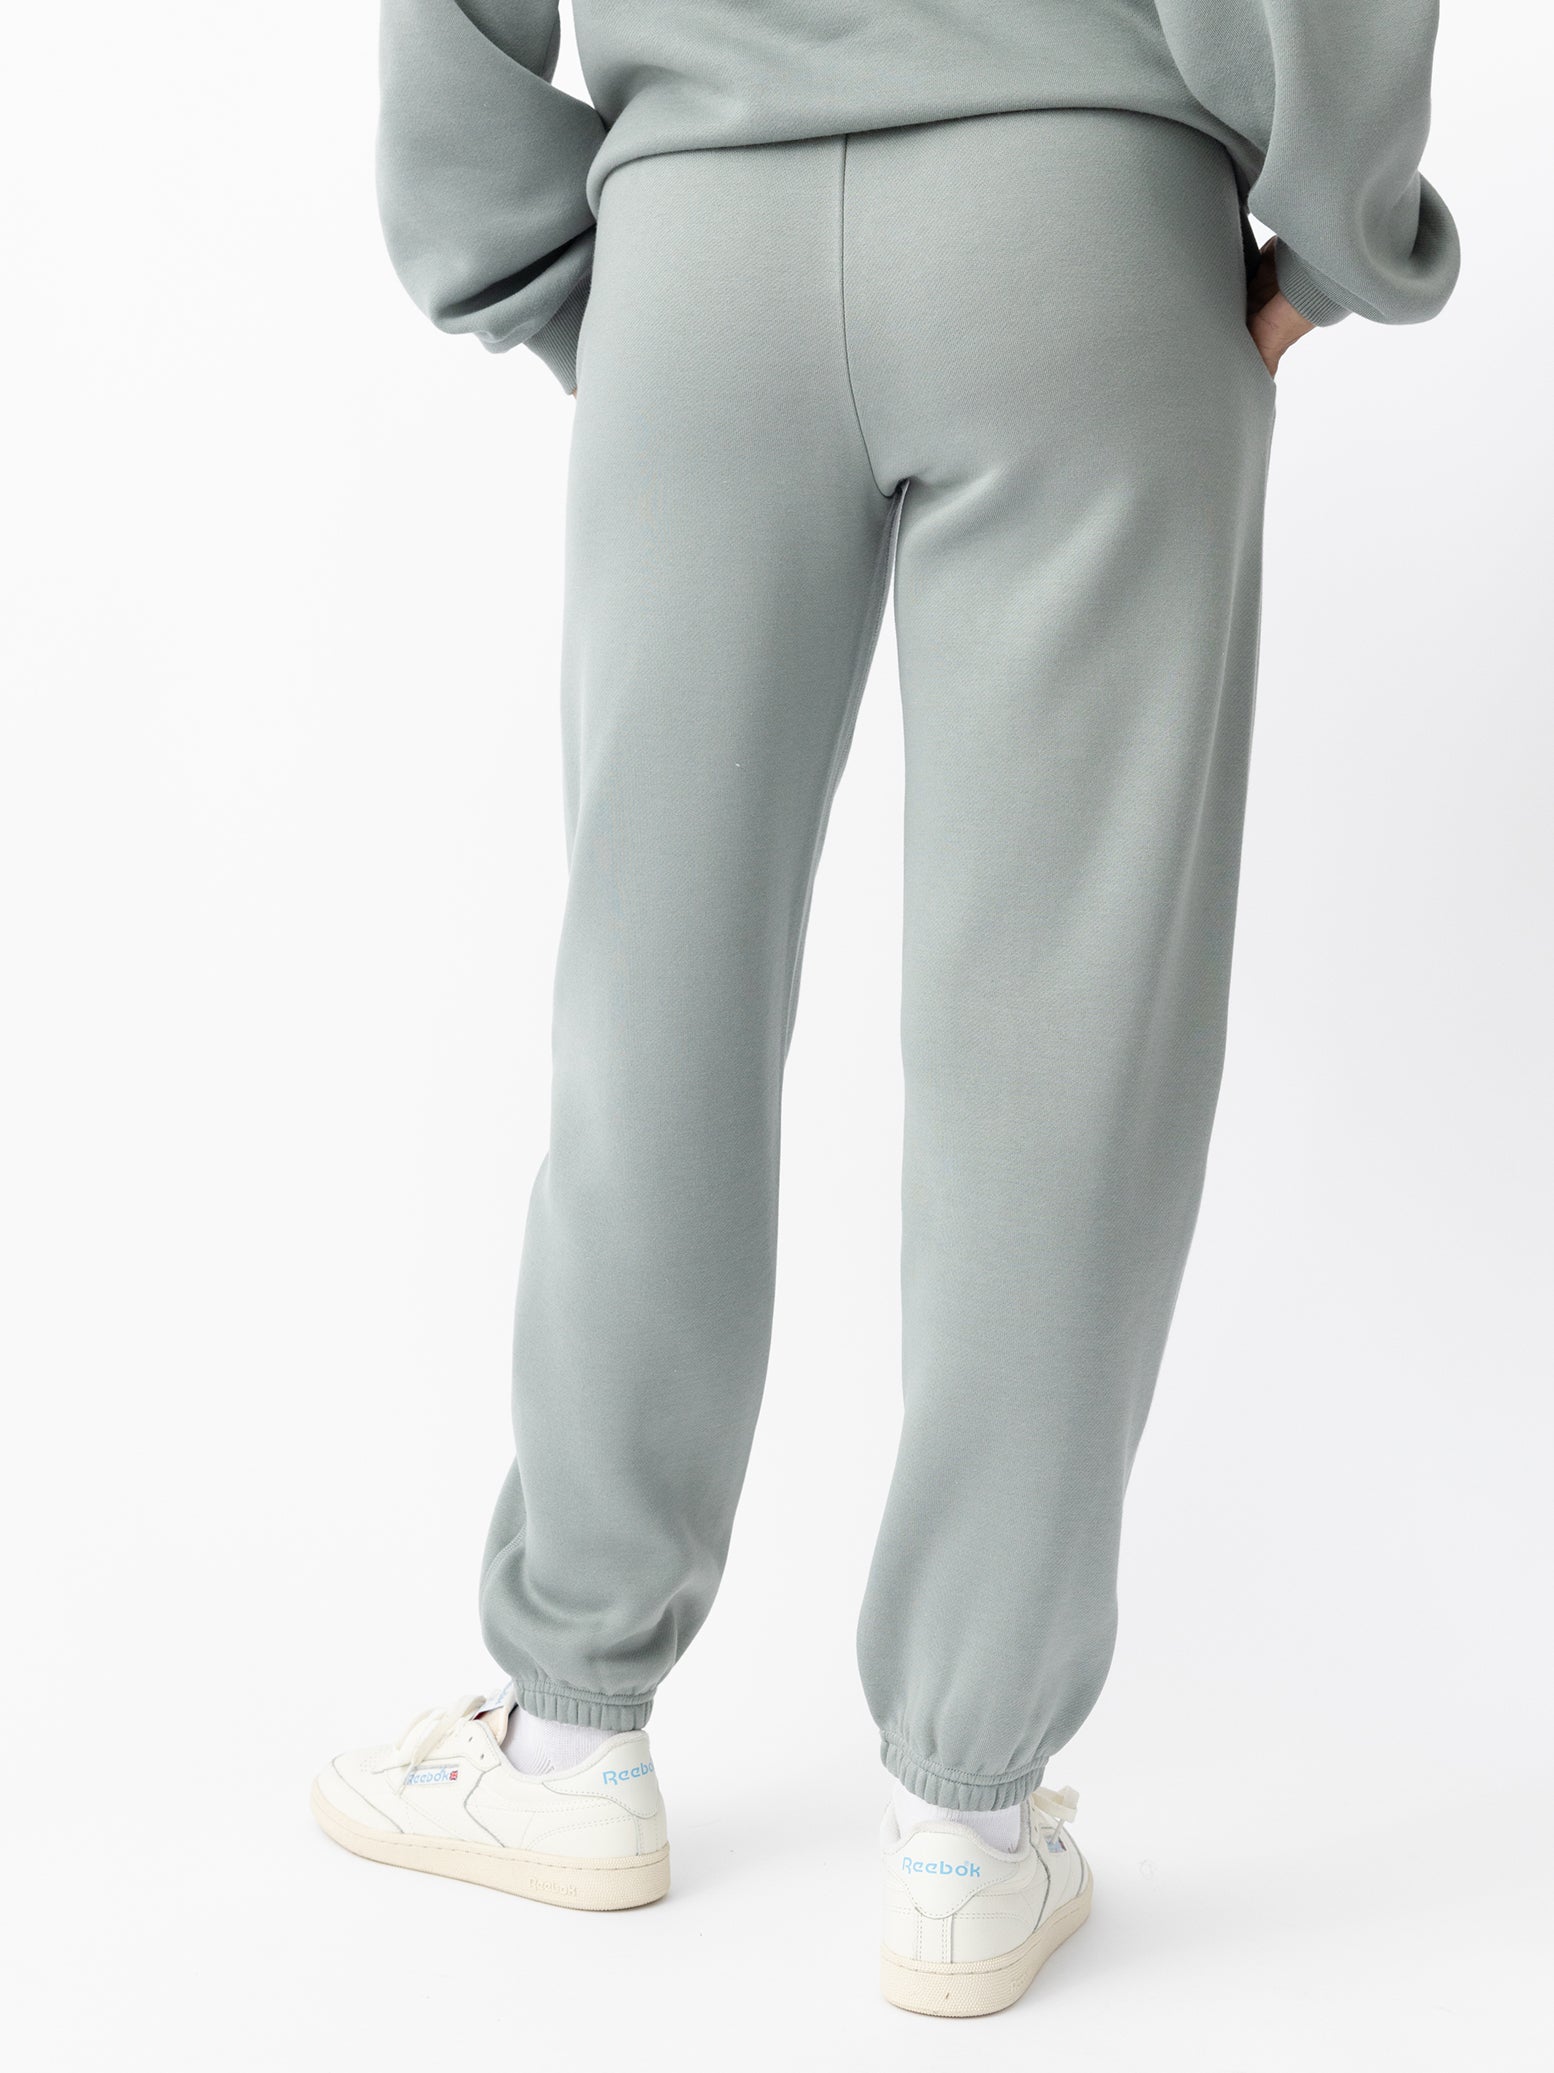 Haze CityScape Joggers. The Joggers are being worn by a female model. The photo is taken from the waist down with the models hand in the pocket of the joggers. The back ground is white. 